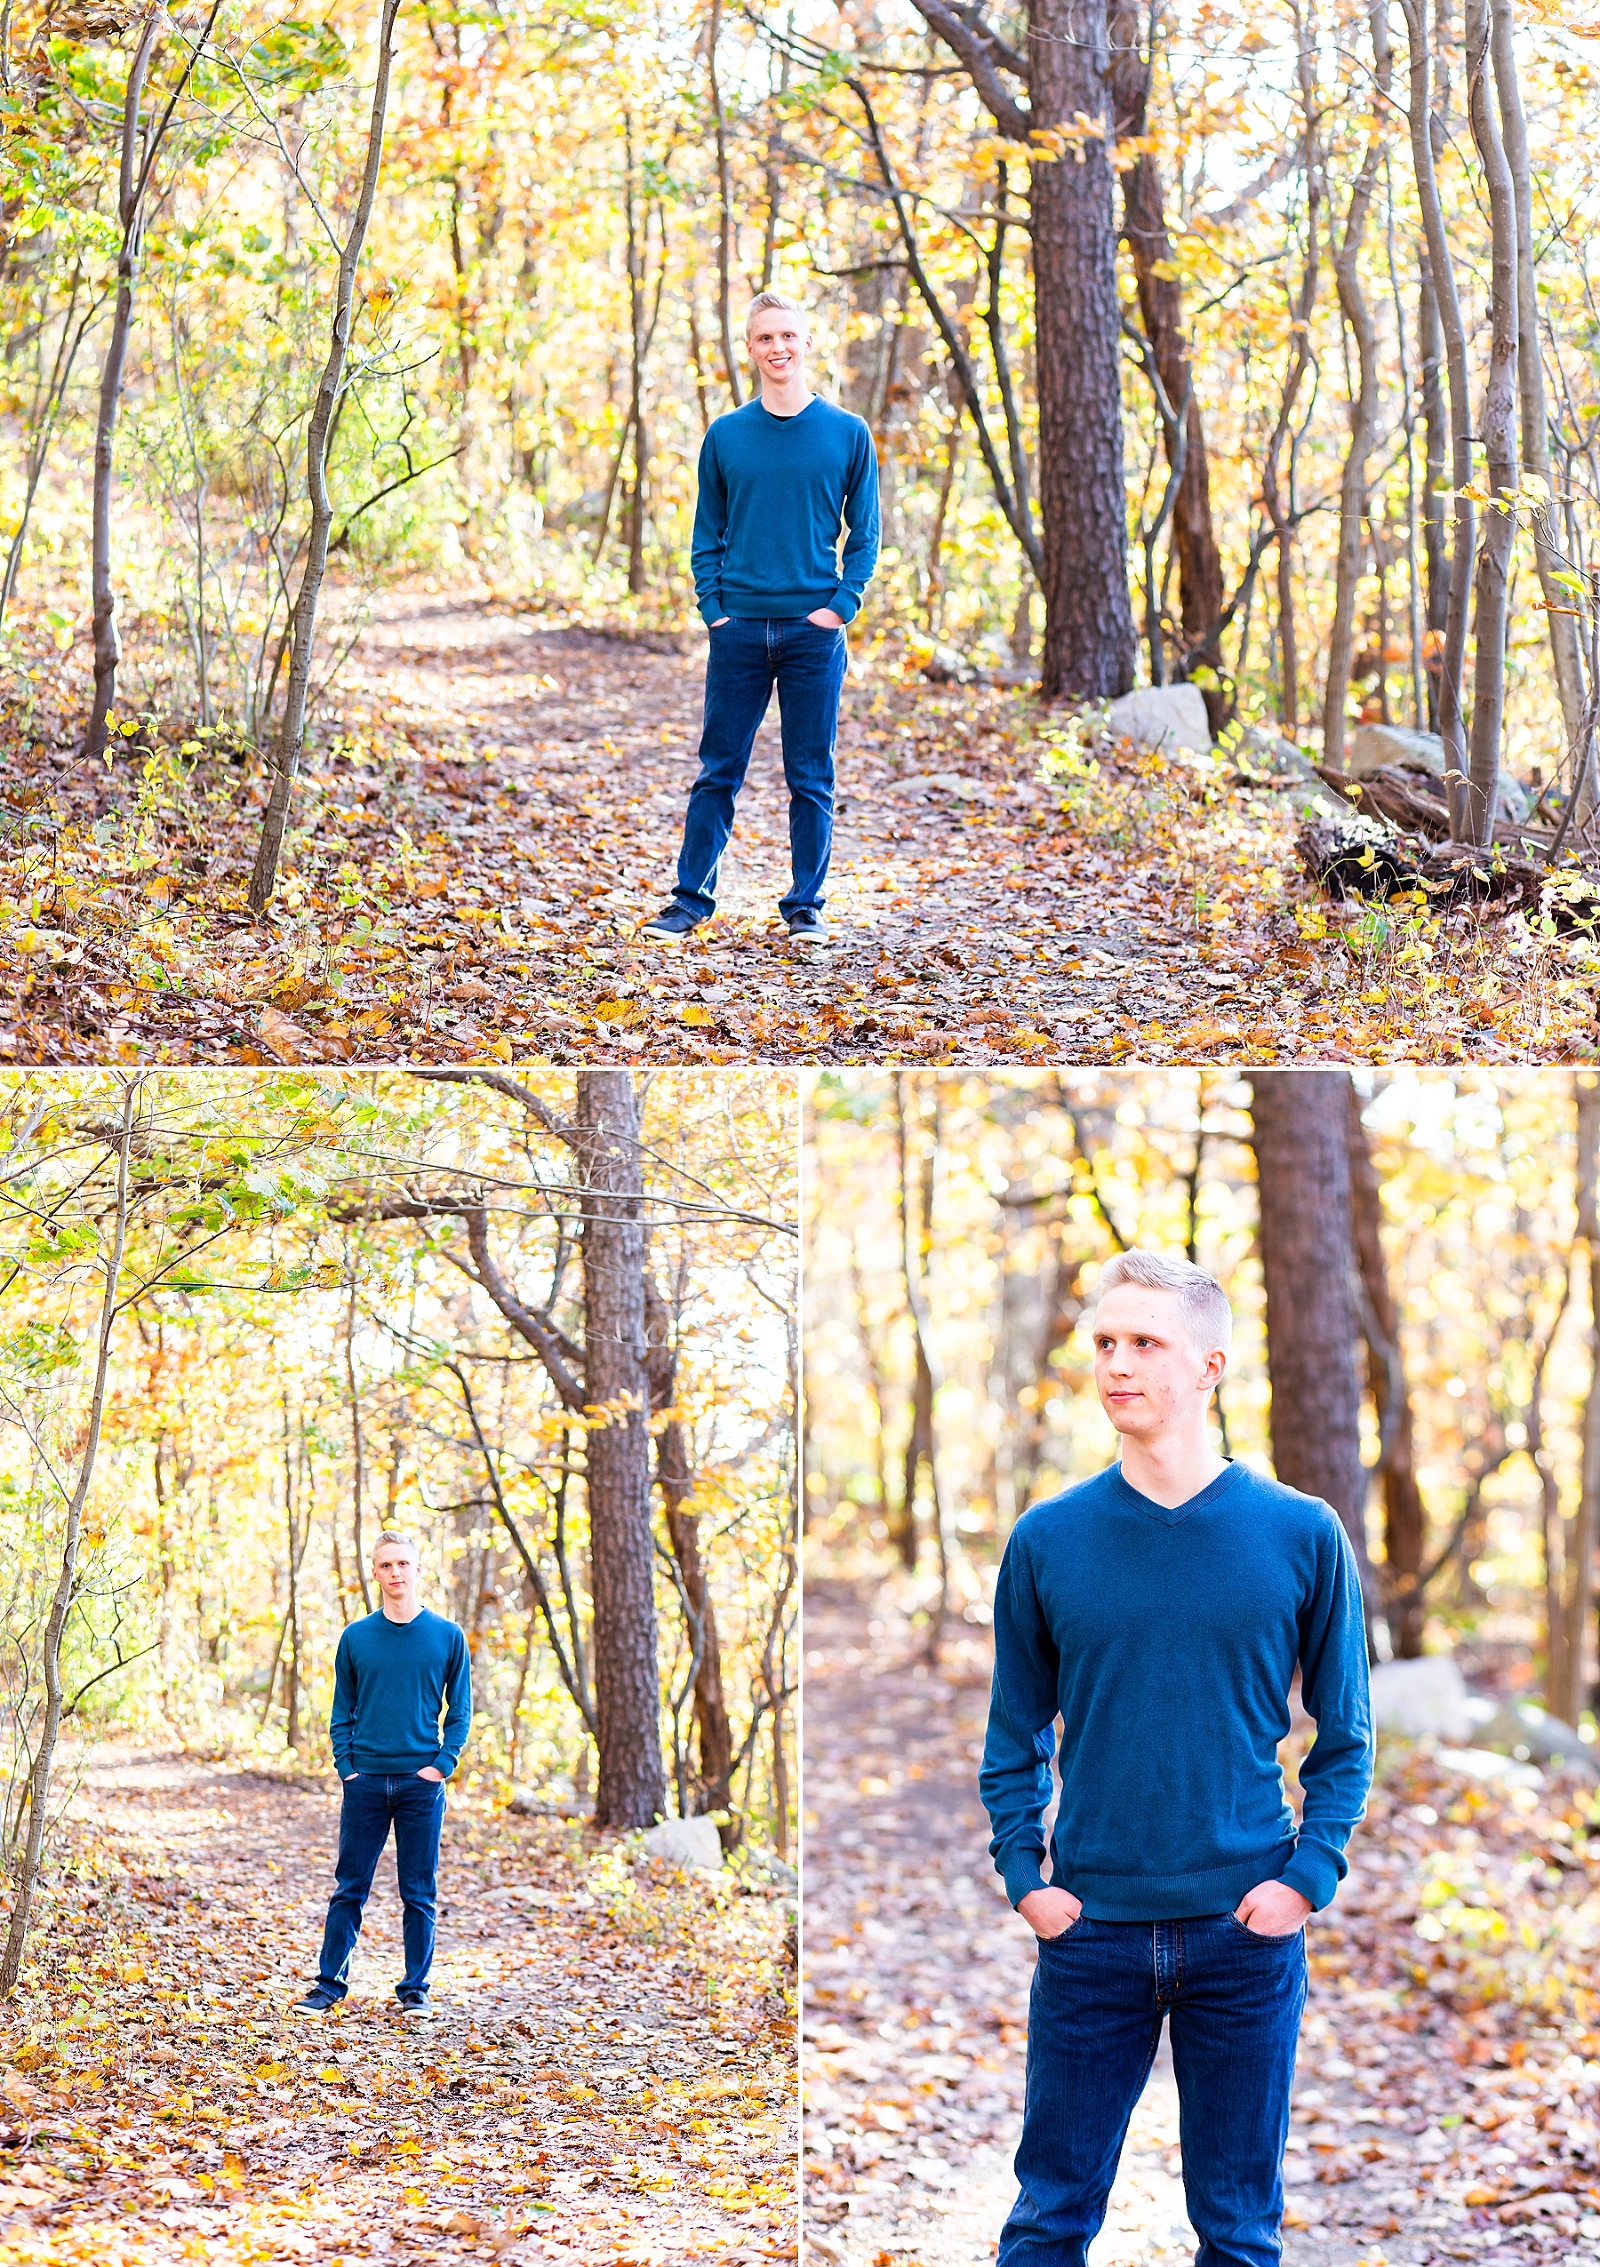 Check out this STUNNING fall senior session at Bears Den Overlook in Bluemont, Virginia! During the PEAK WEEK of fall foliage in Virginia. Senior, senior photos, natural, senior pics, fall photos, peak fall colors, Virginia senior. Photographed by Bethanie Vetter Photography LLC #SeniorPhotos #FallSenior #FallSeniorPhotos #SeniorPics #Senior2020